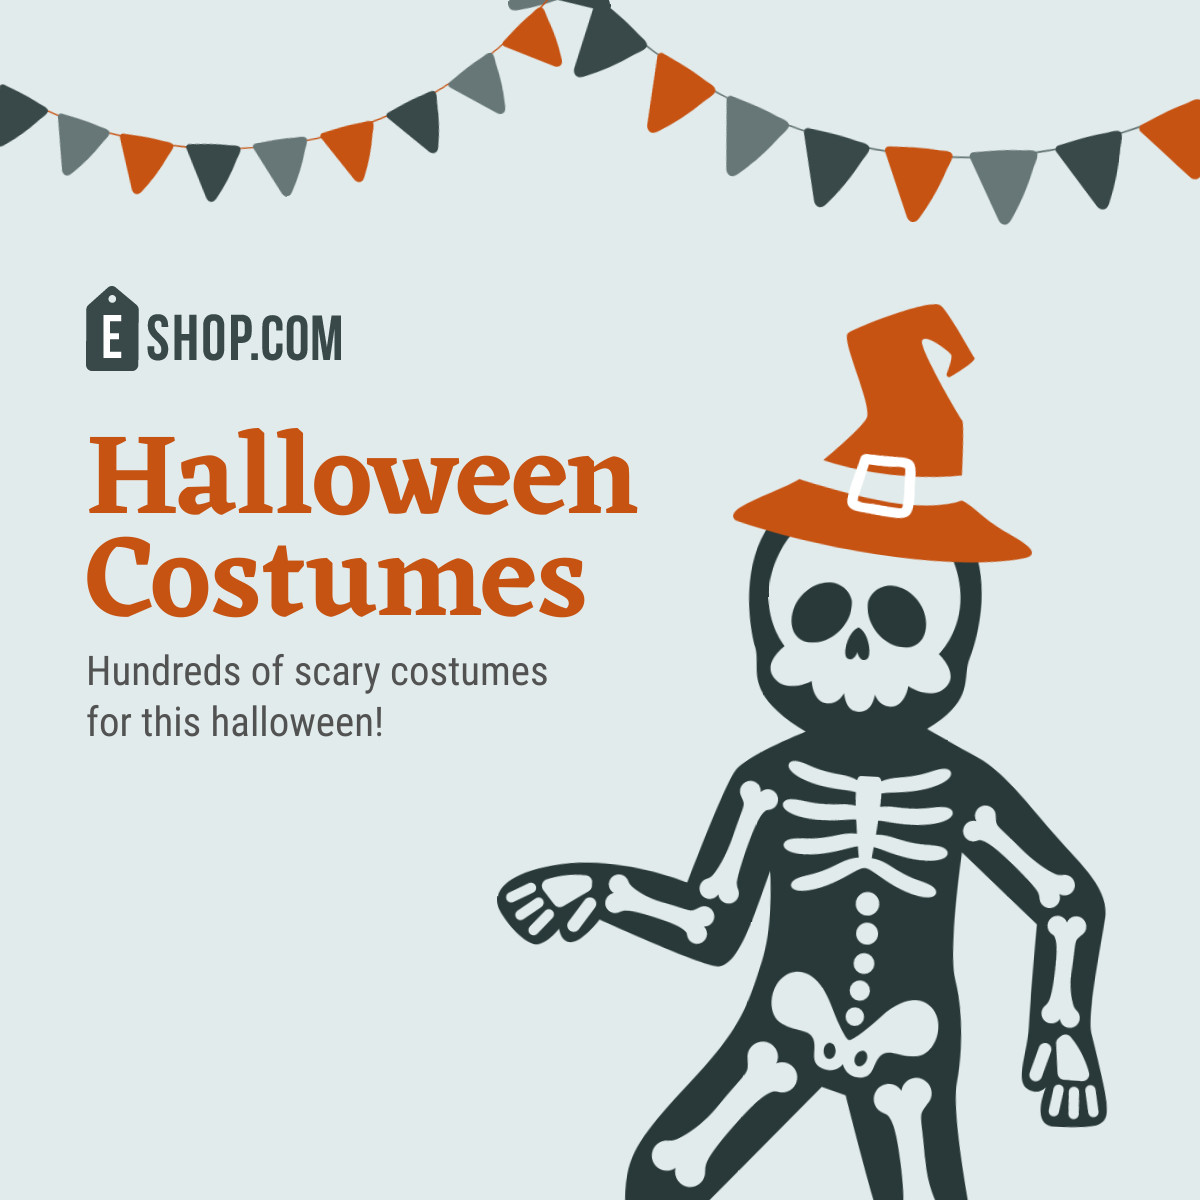 Hundreds of Scary Halloween Costumes Inline Rectangle 300x250